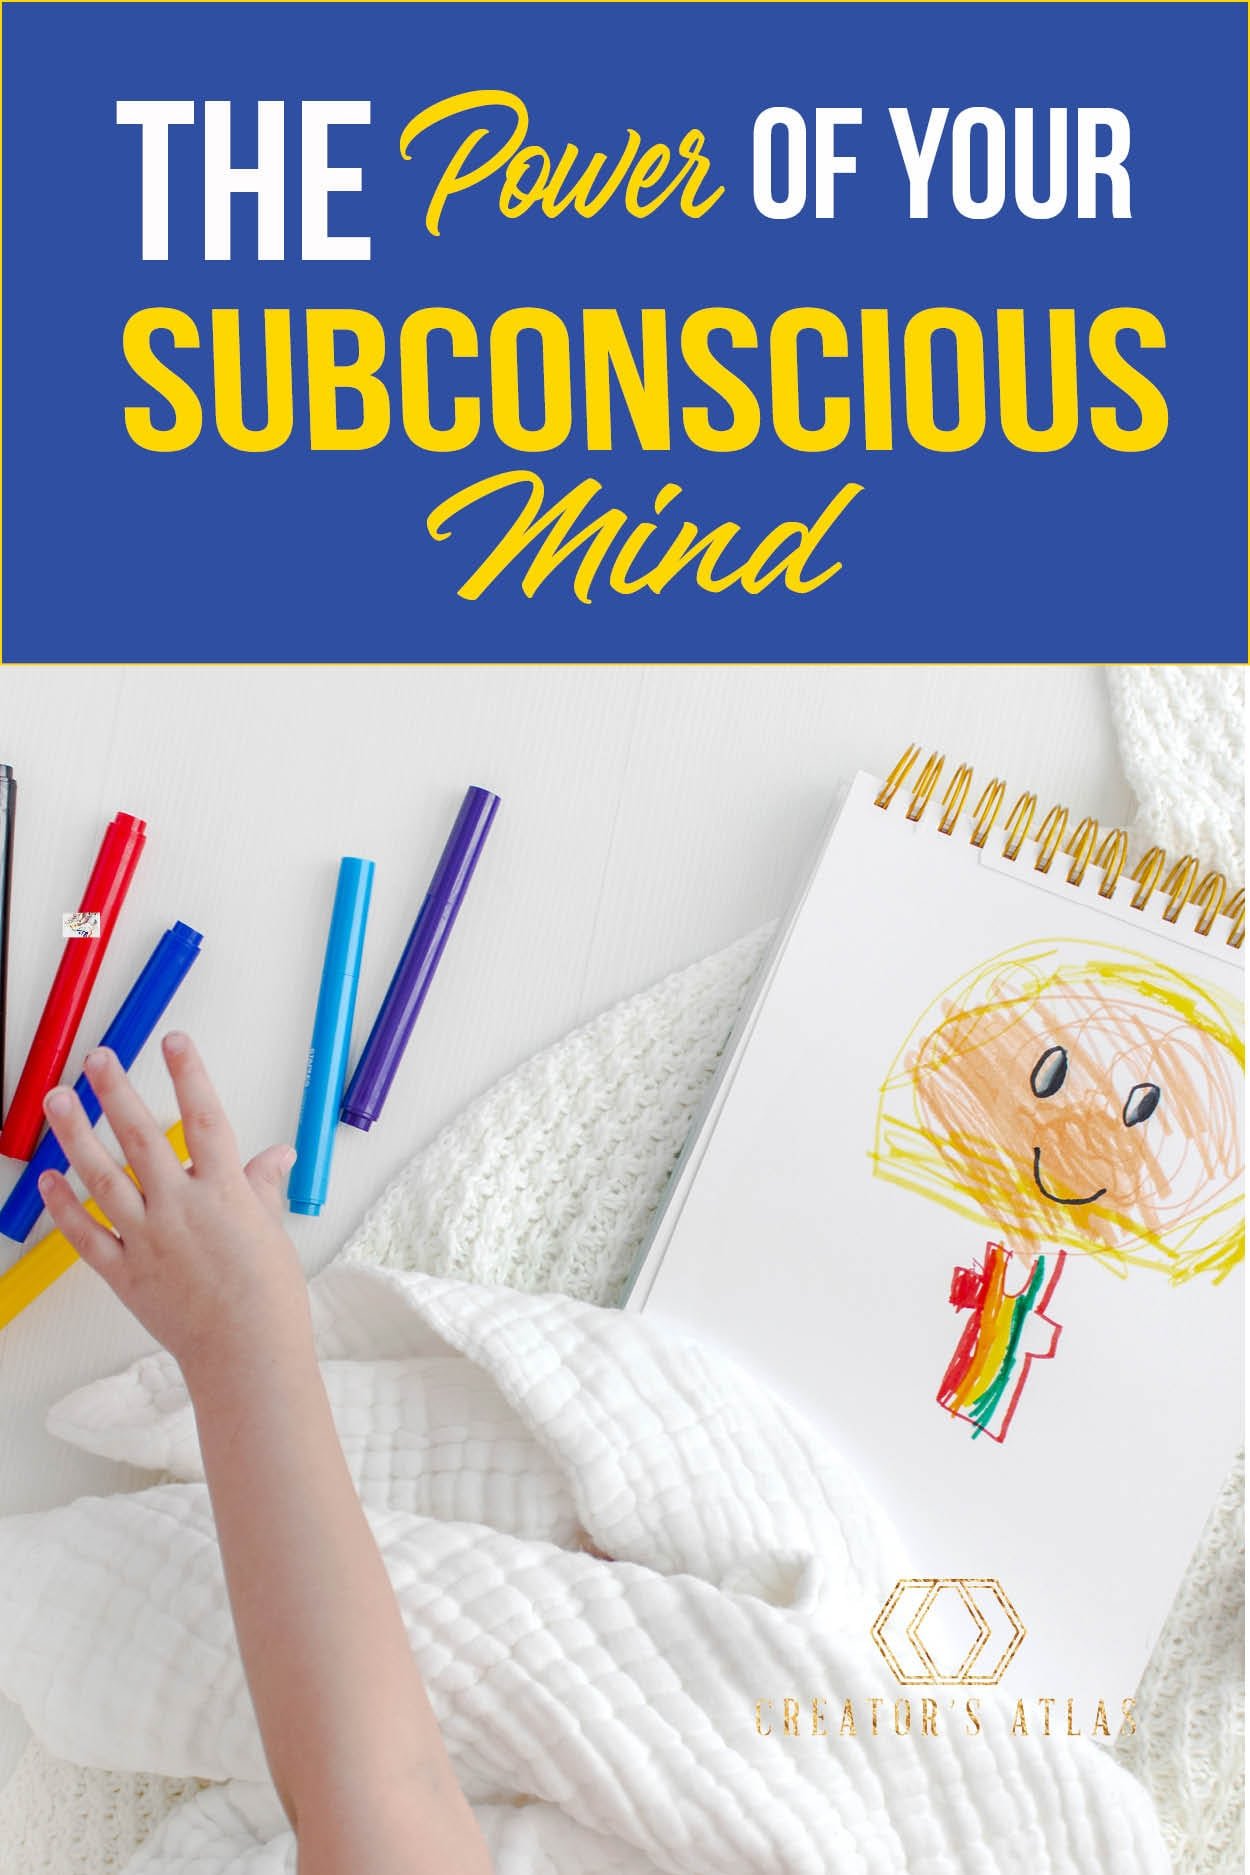 In this post, I show you 5 simple steps that you can use to easily reprogram your subconscious mind. he power of the subconscious mind is amazing. The subconscious mind has the power to heal and solve all of life's problems. Here is how your mind can help. #unconscious The subconscious mind can be reprogrammed to change your life. 